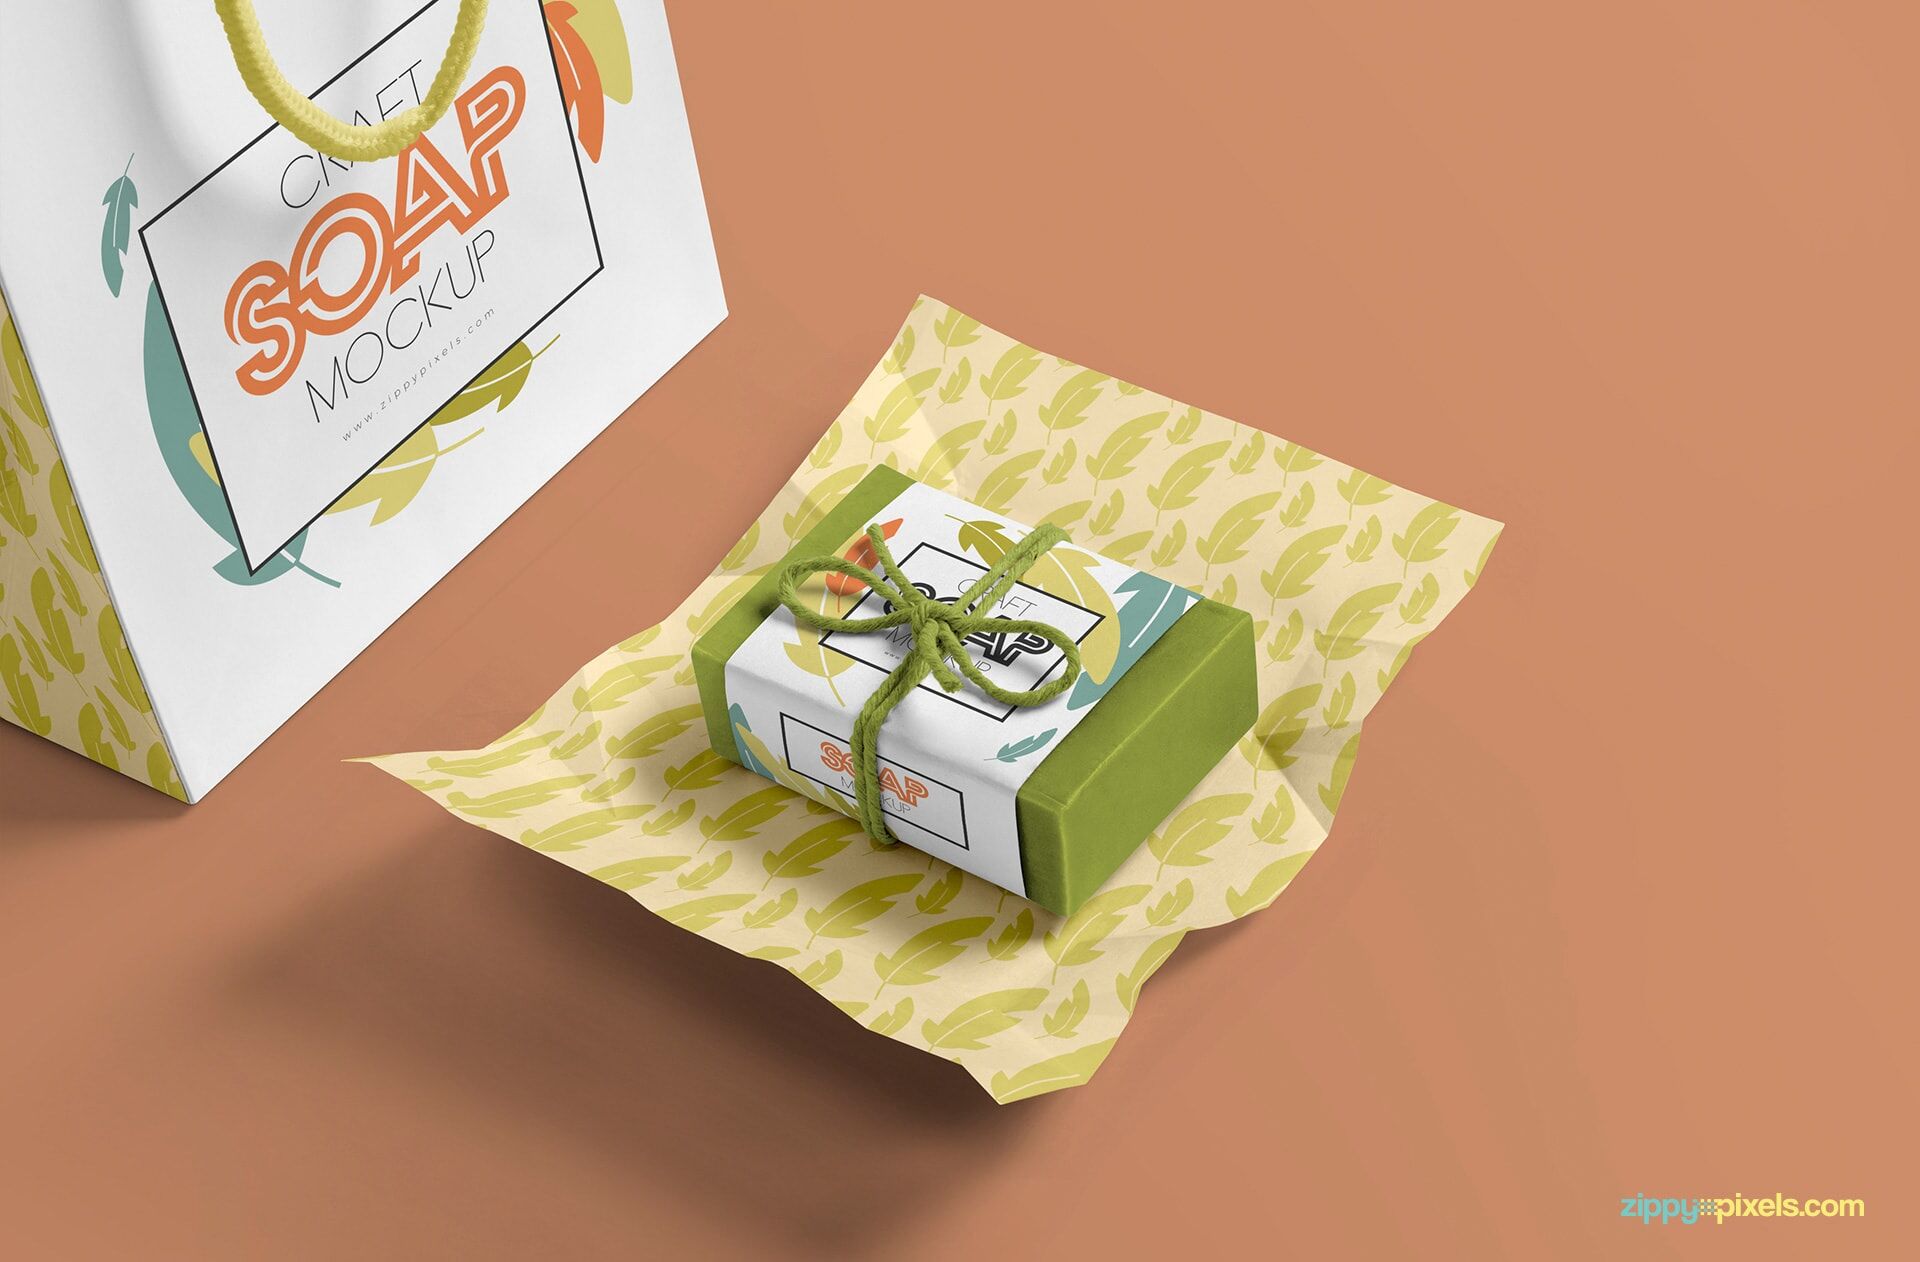 Soap Bar Along with Shopping Bag in Perspective Mockup FREE PSD